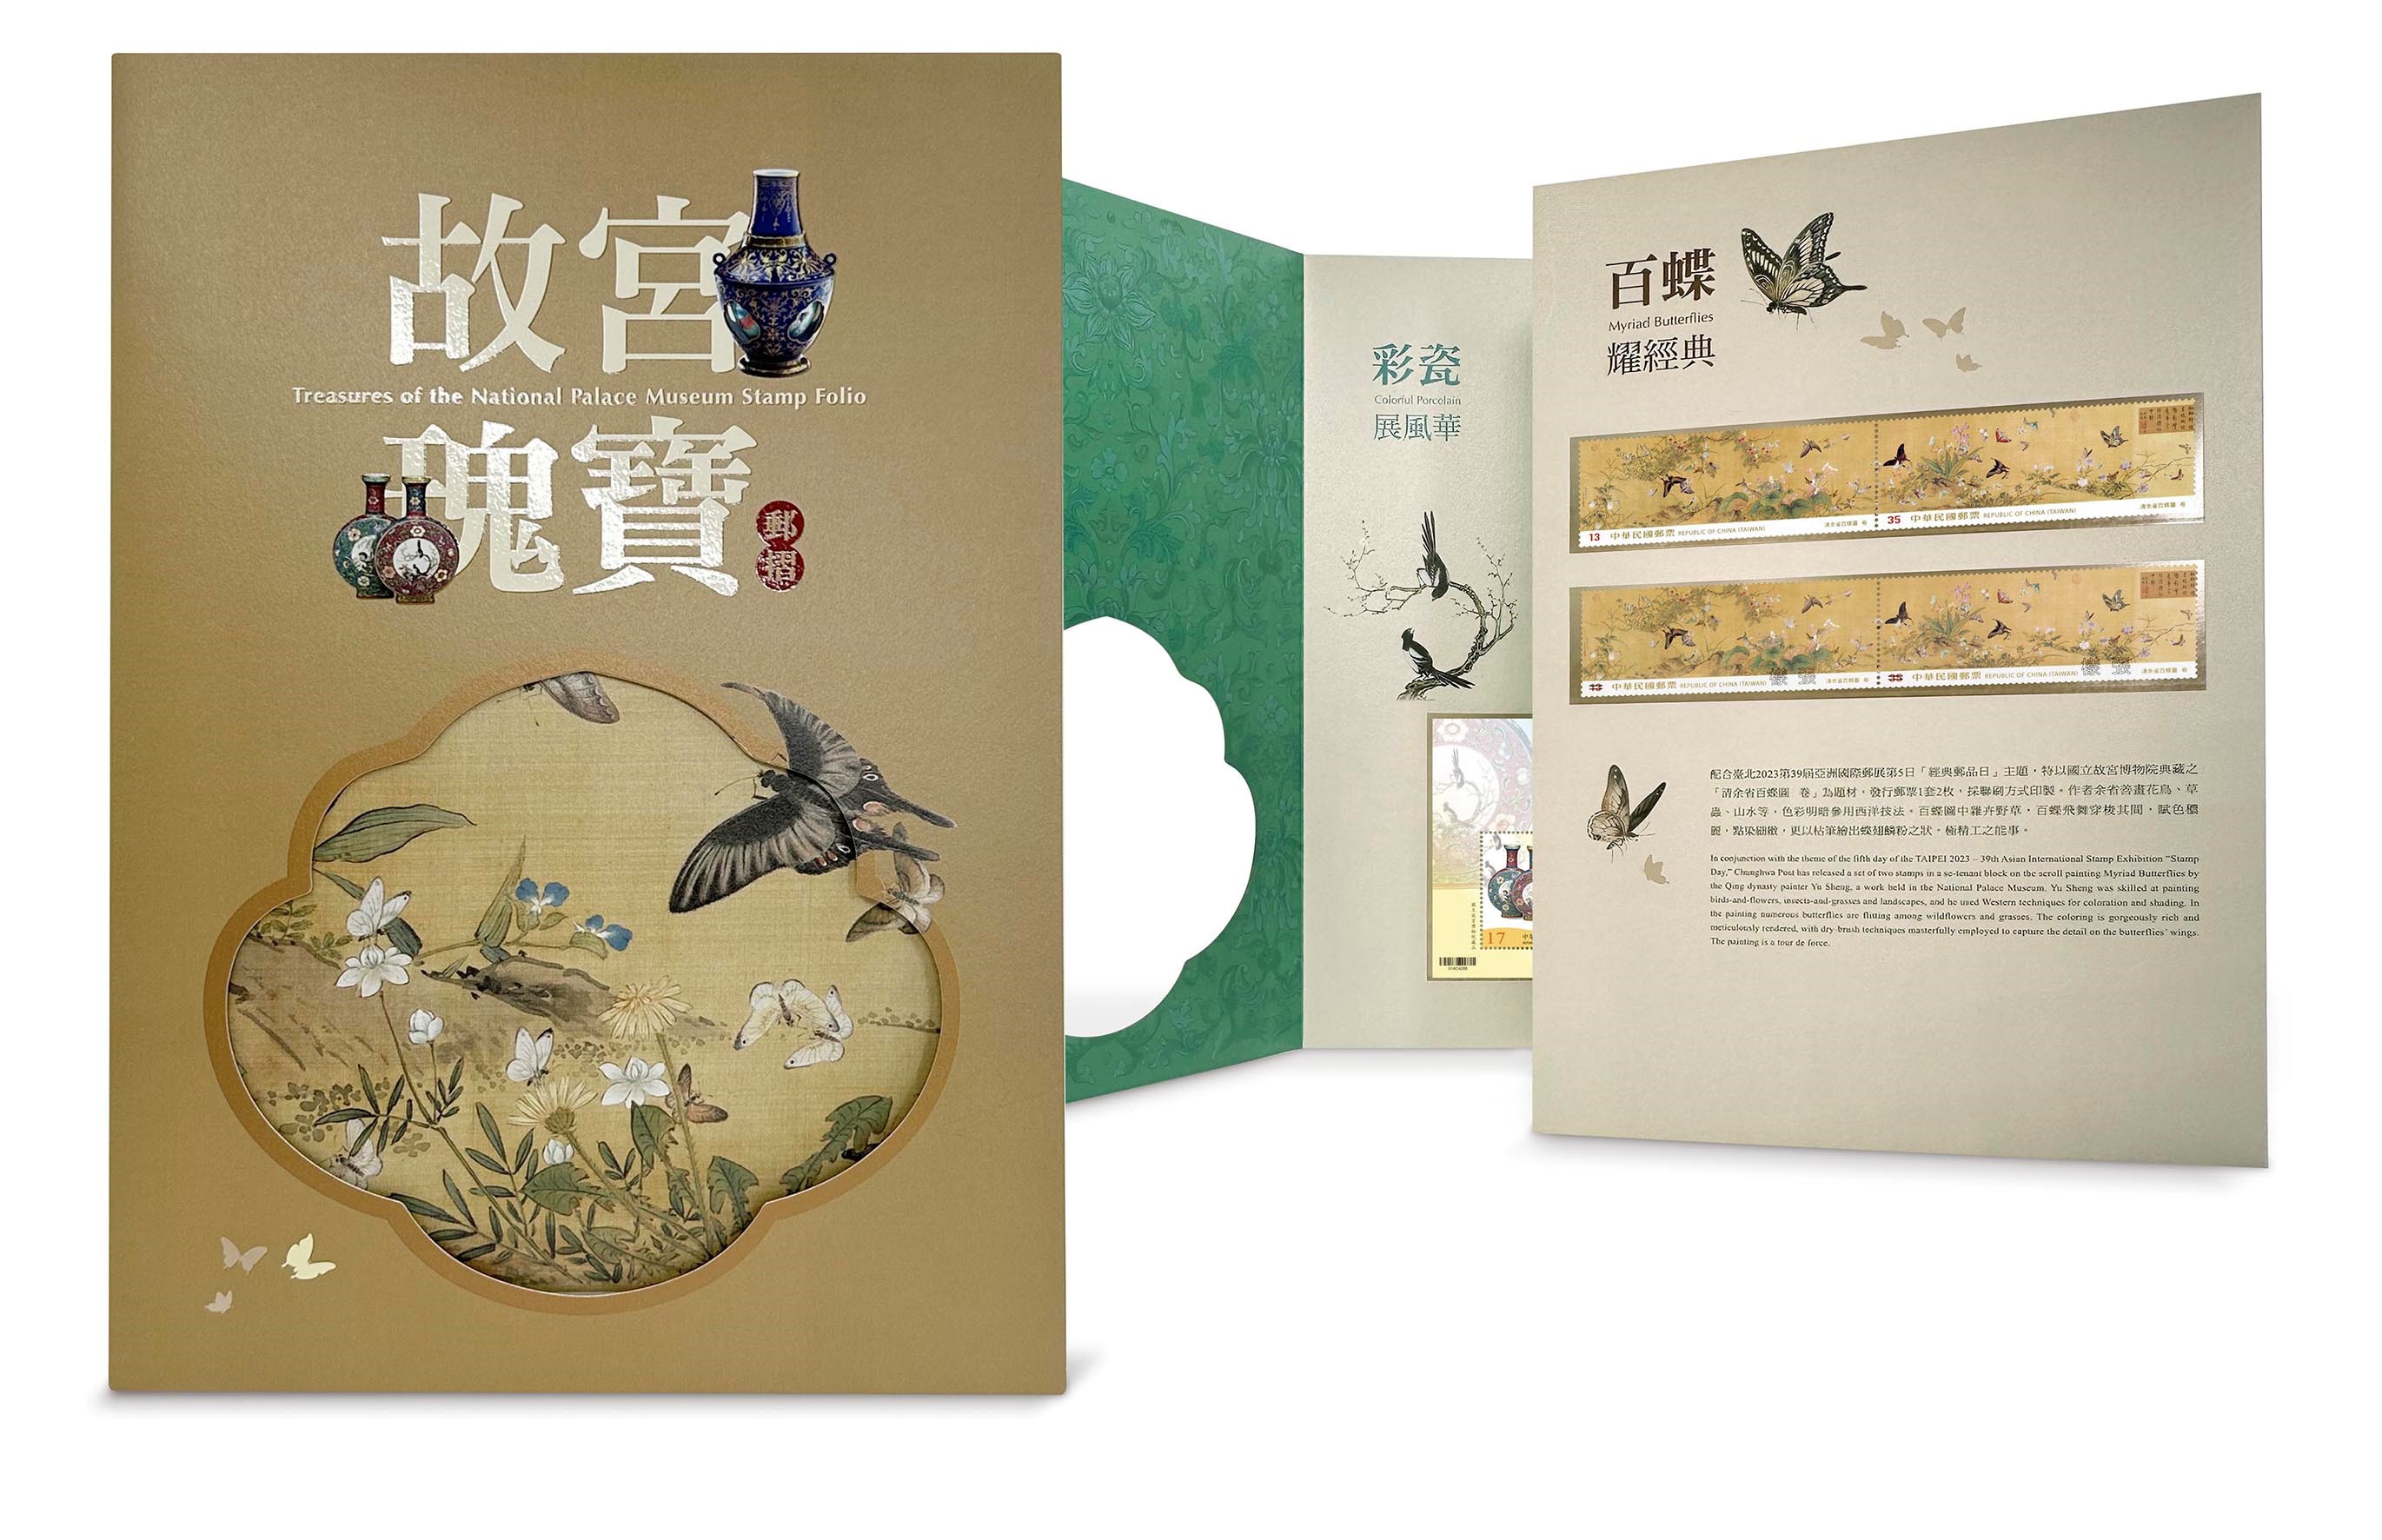 Treasures of the National Palace Museum StampFolio